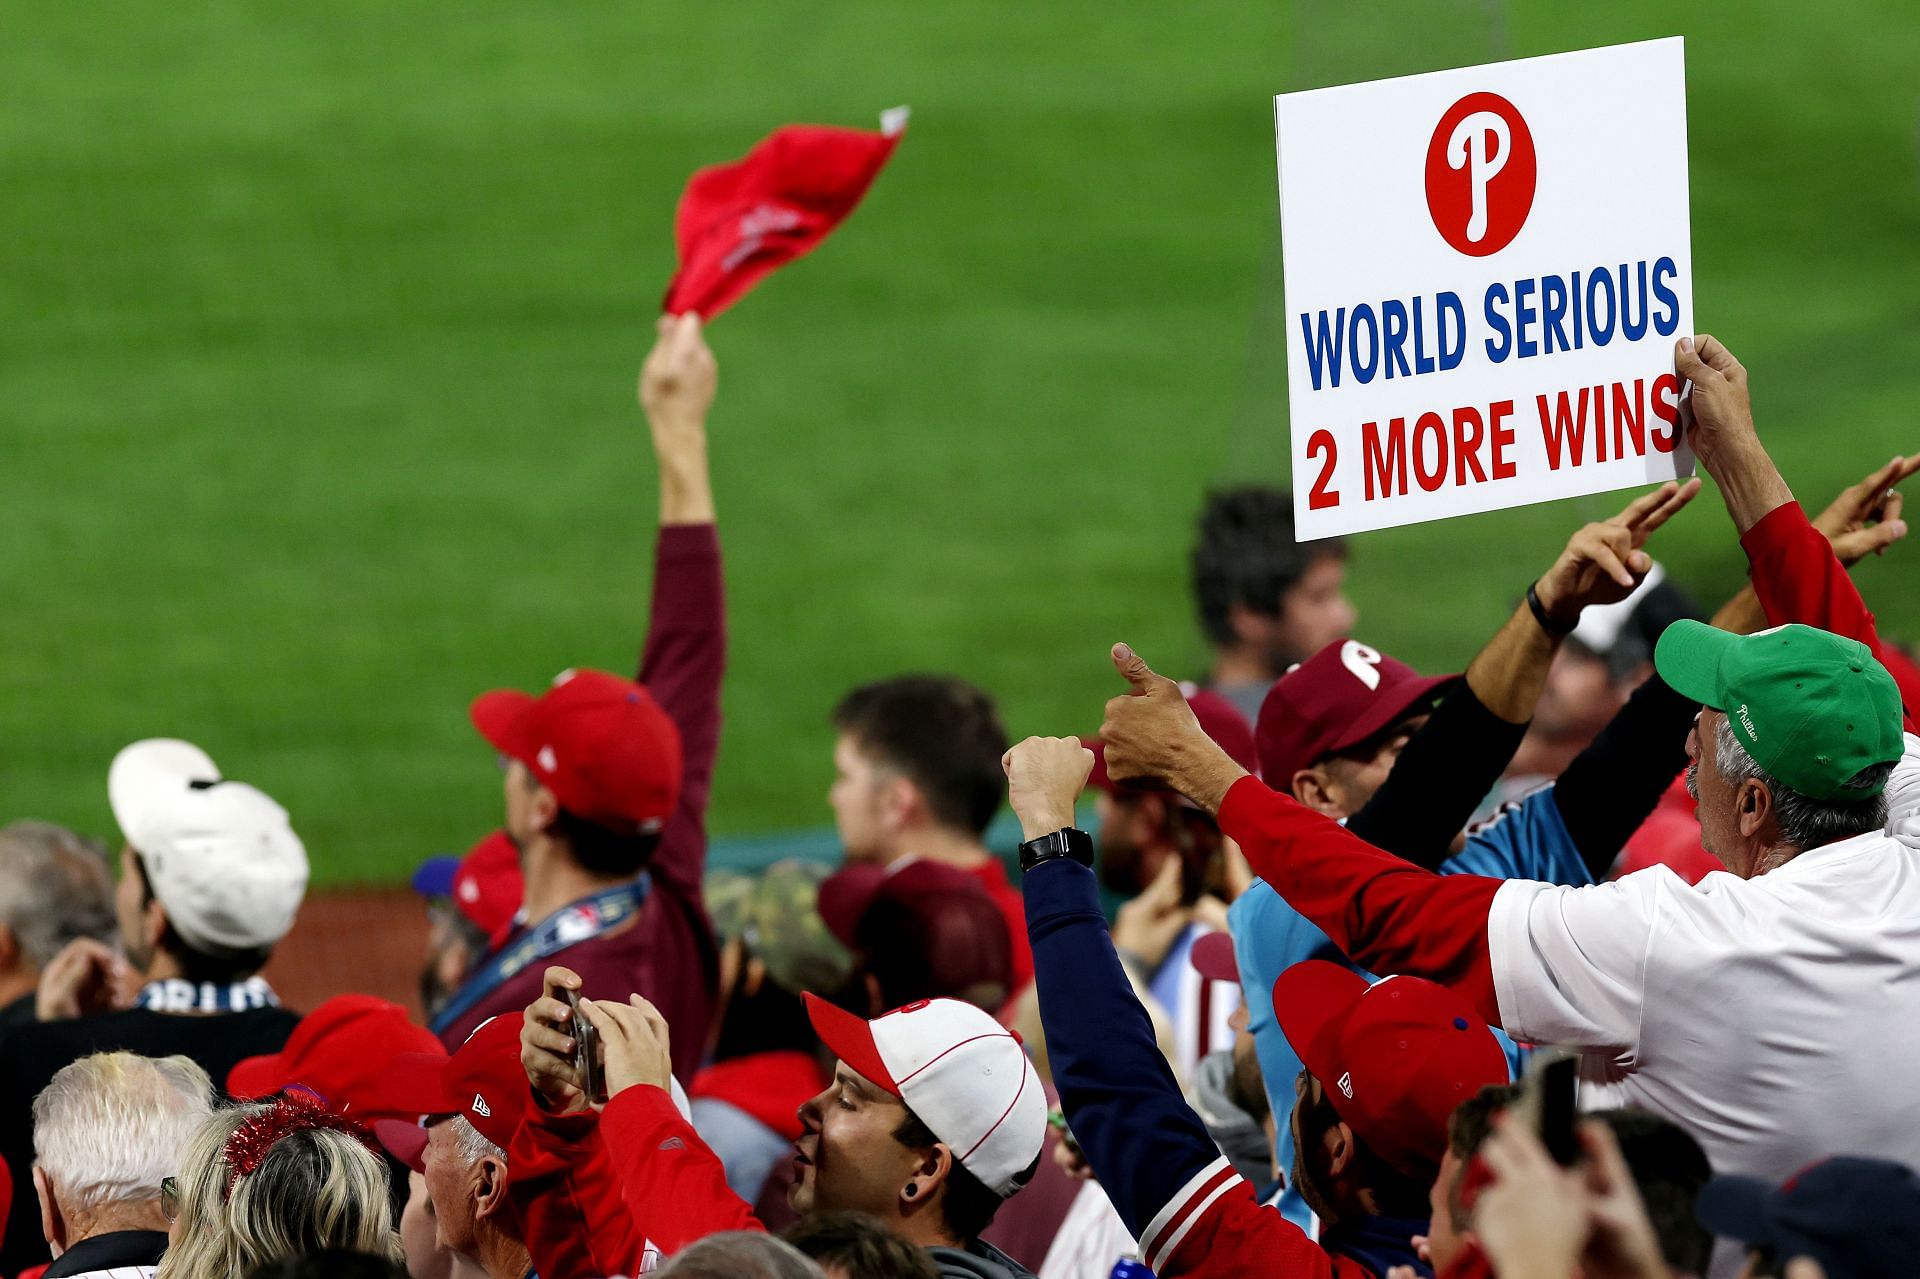 Corey Seidman: The Phillies are now favored to win the World Series  Essentially the number at which the Astros opened the series